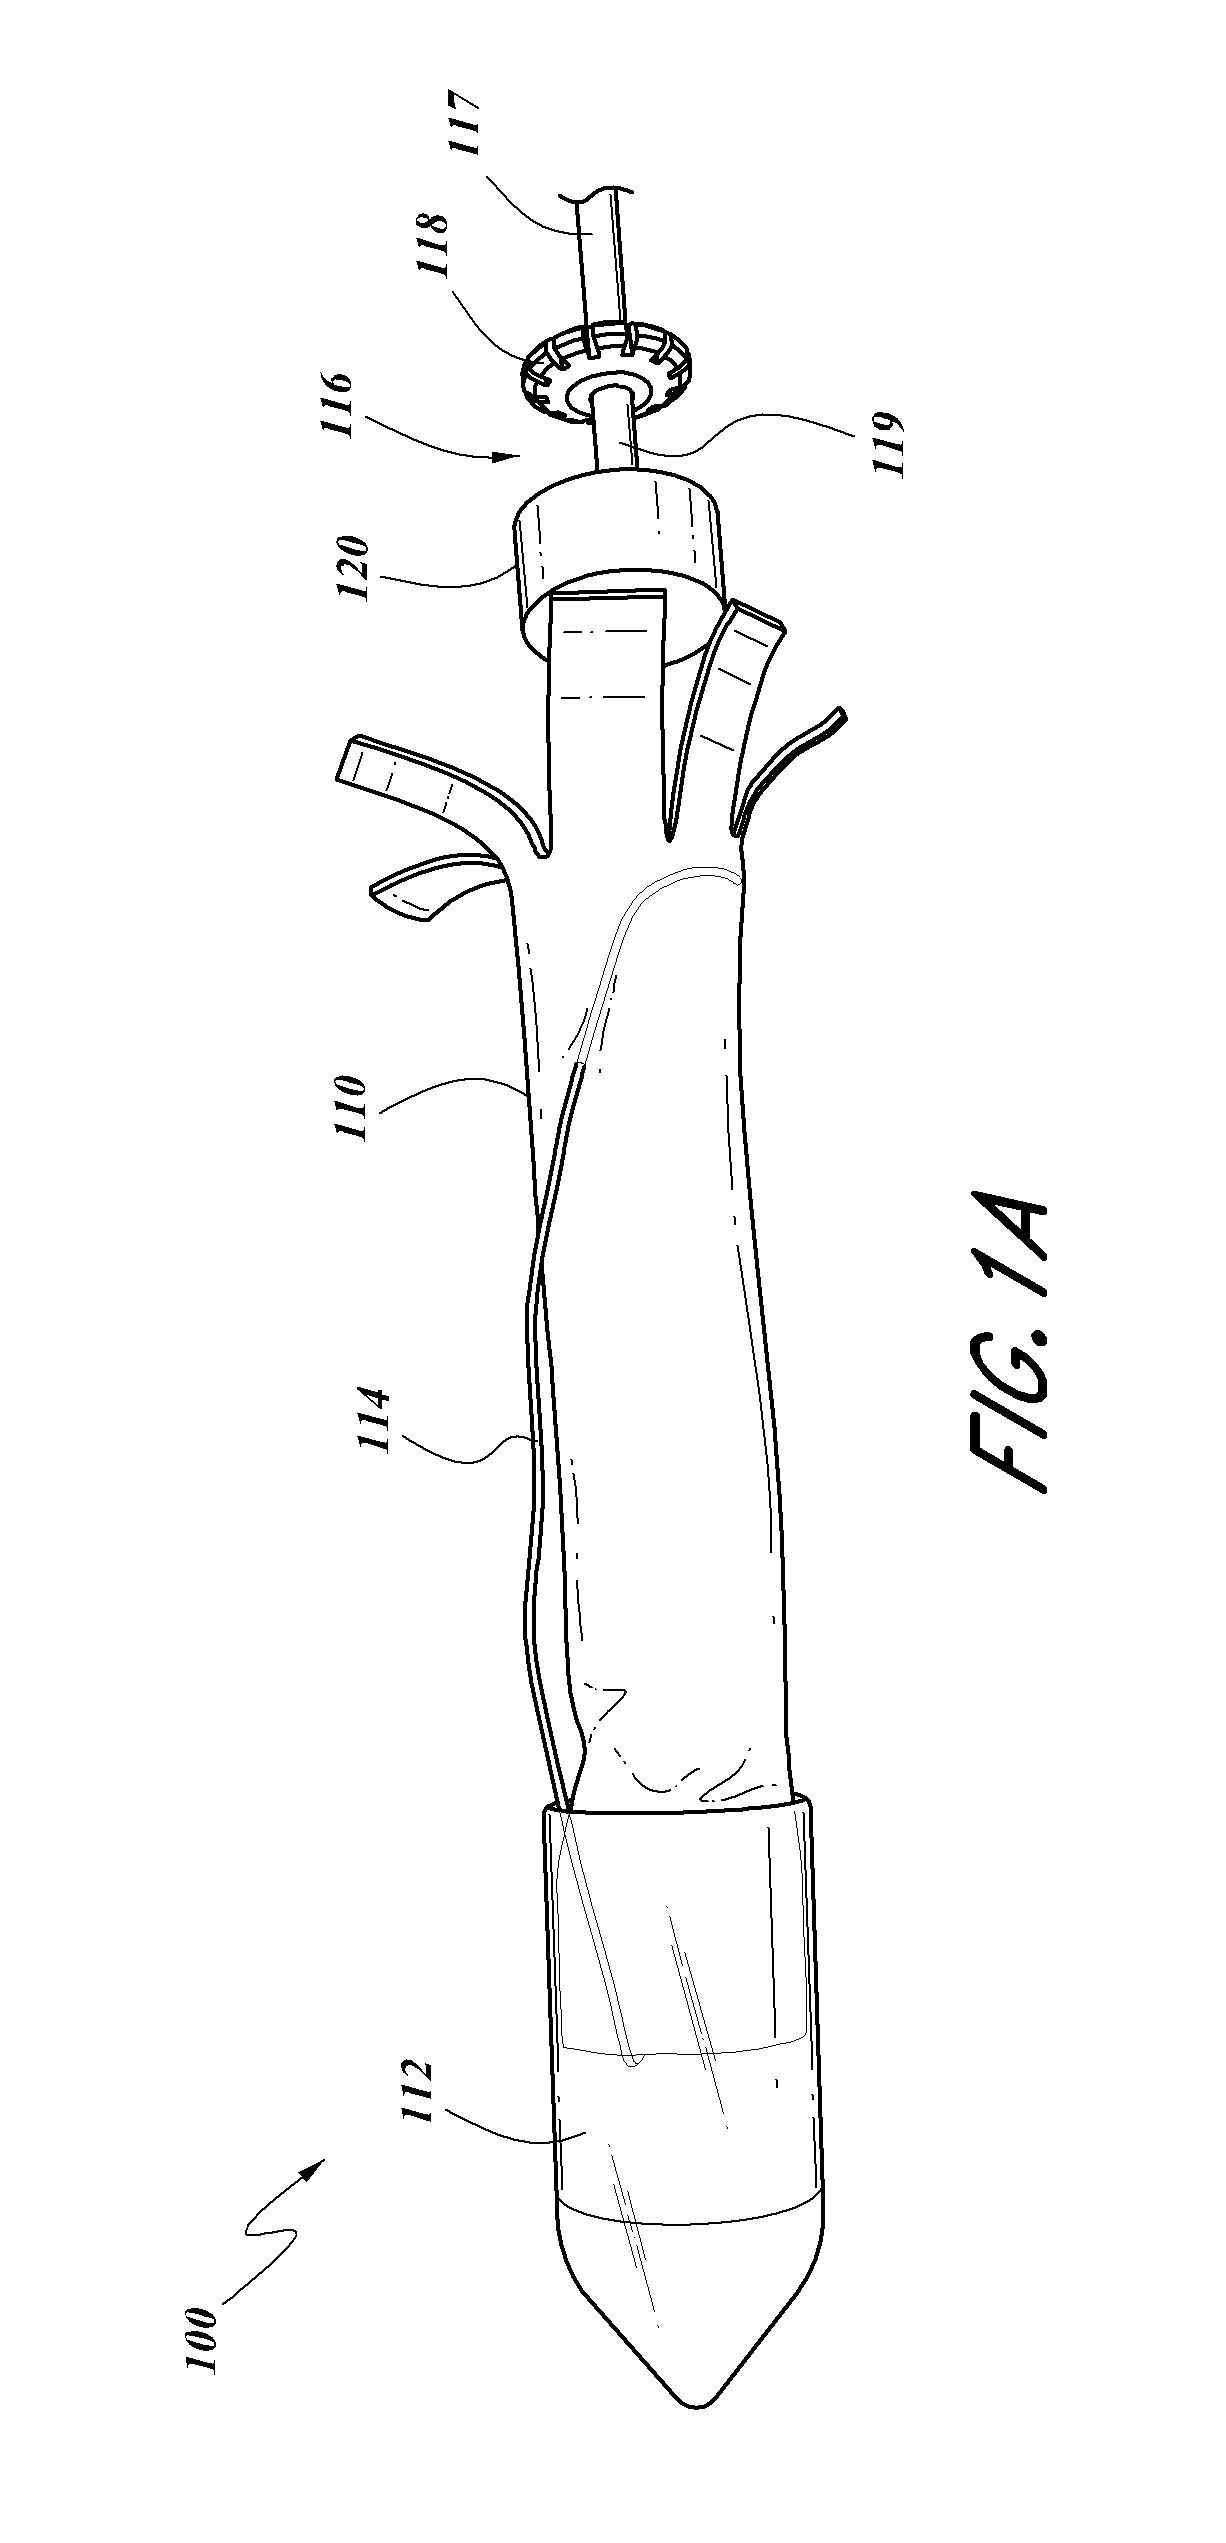 Prosthesis, delivery device and methods of use